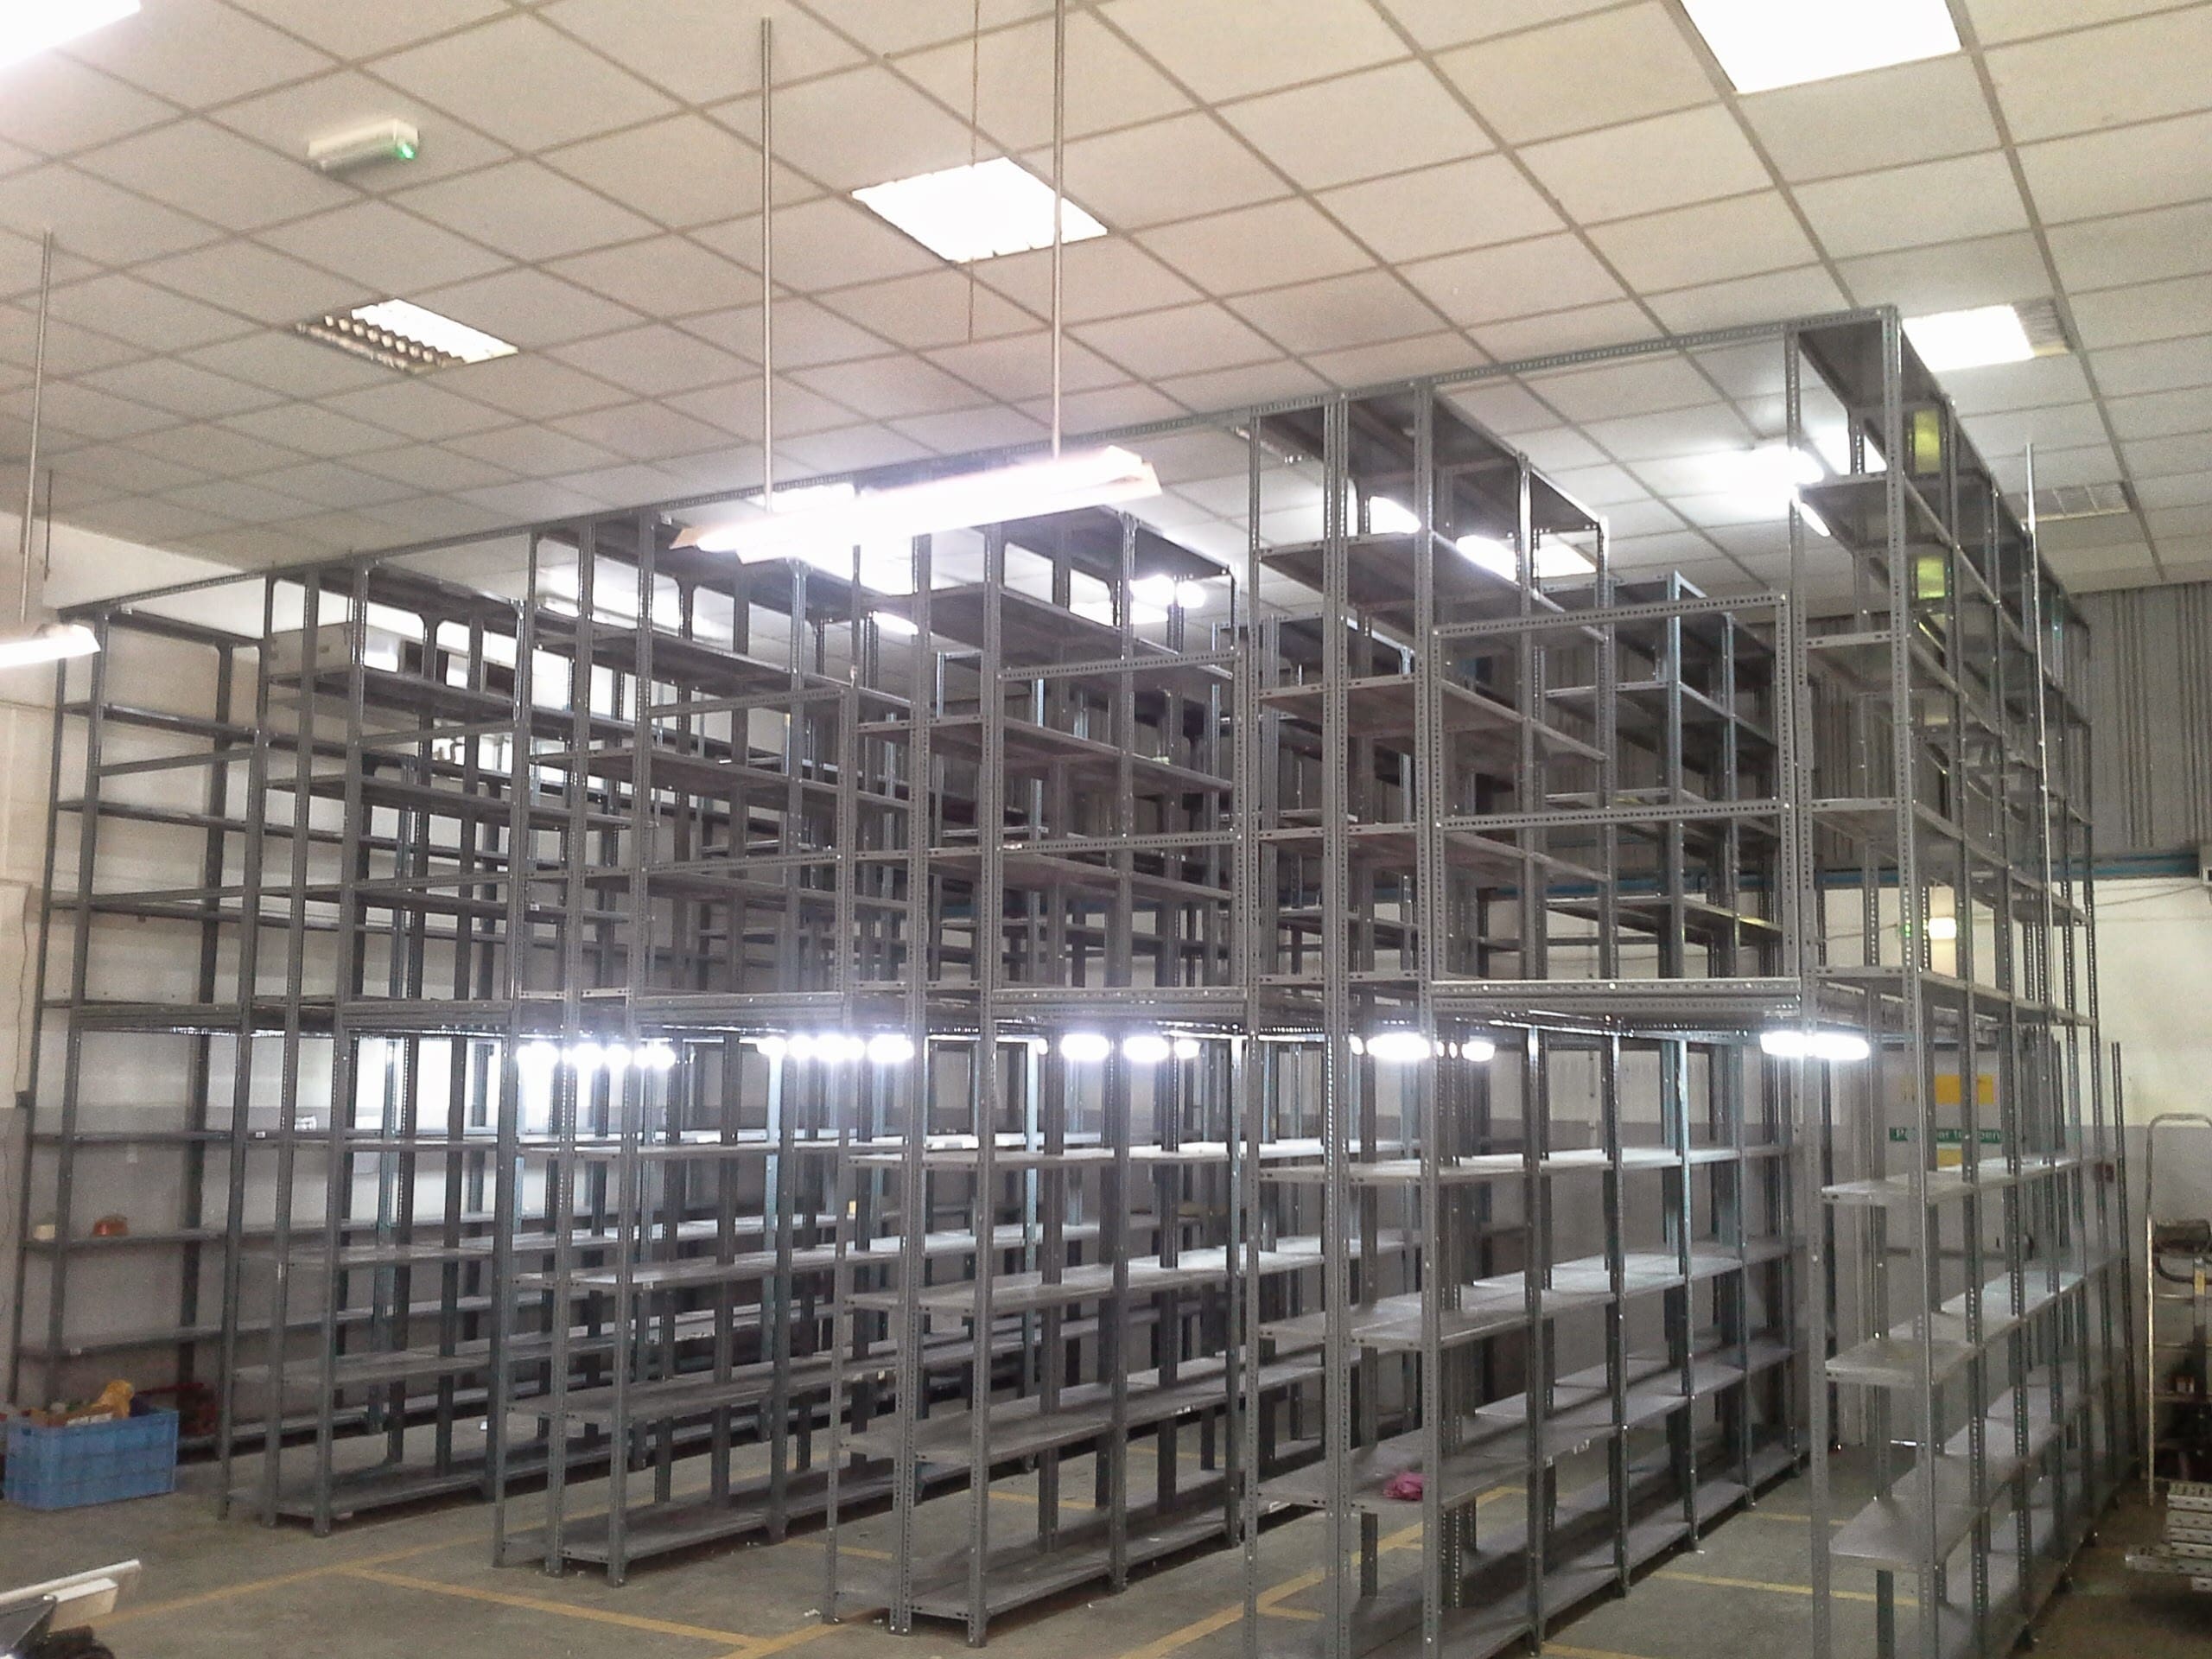 slotted angle racks supplier in Dubai by Souk Stores